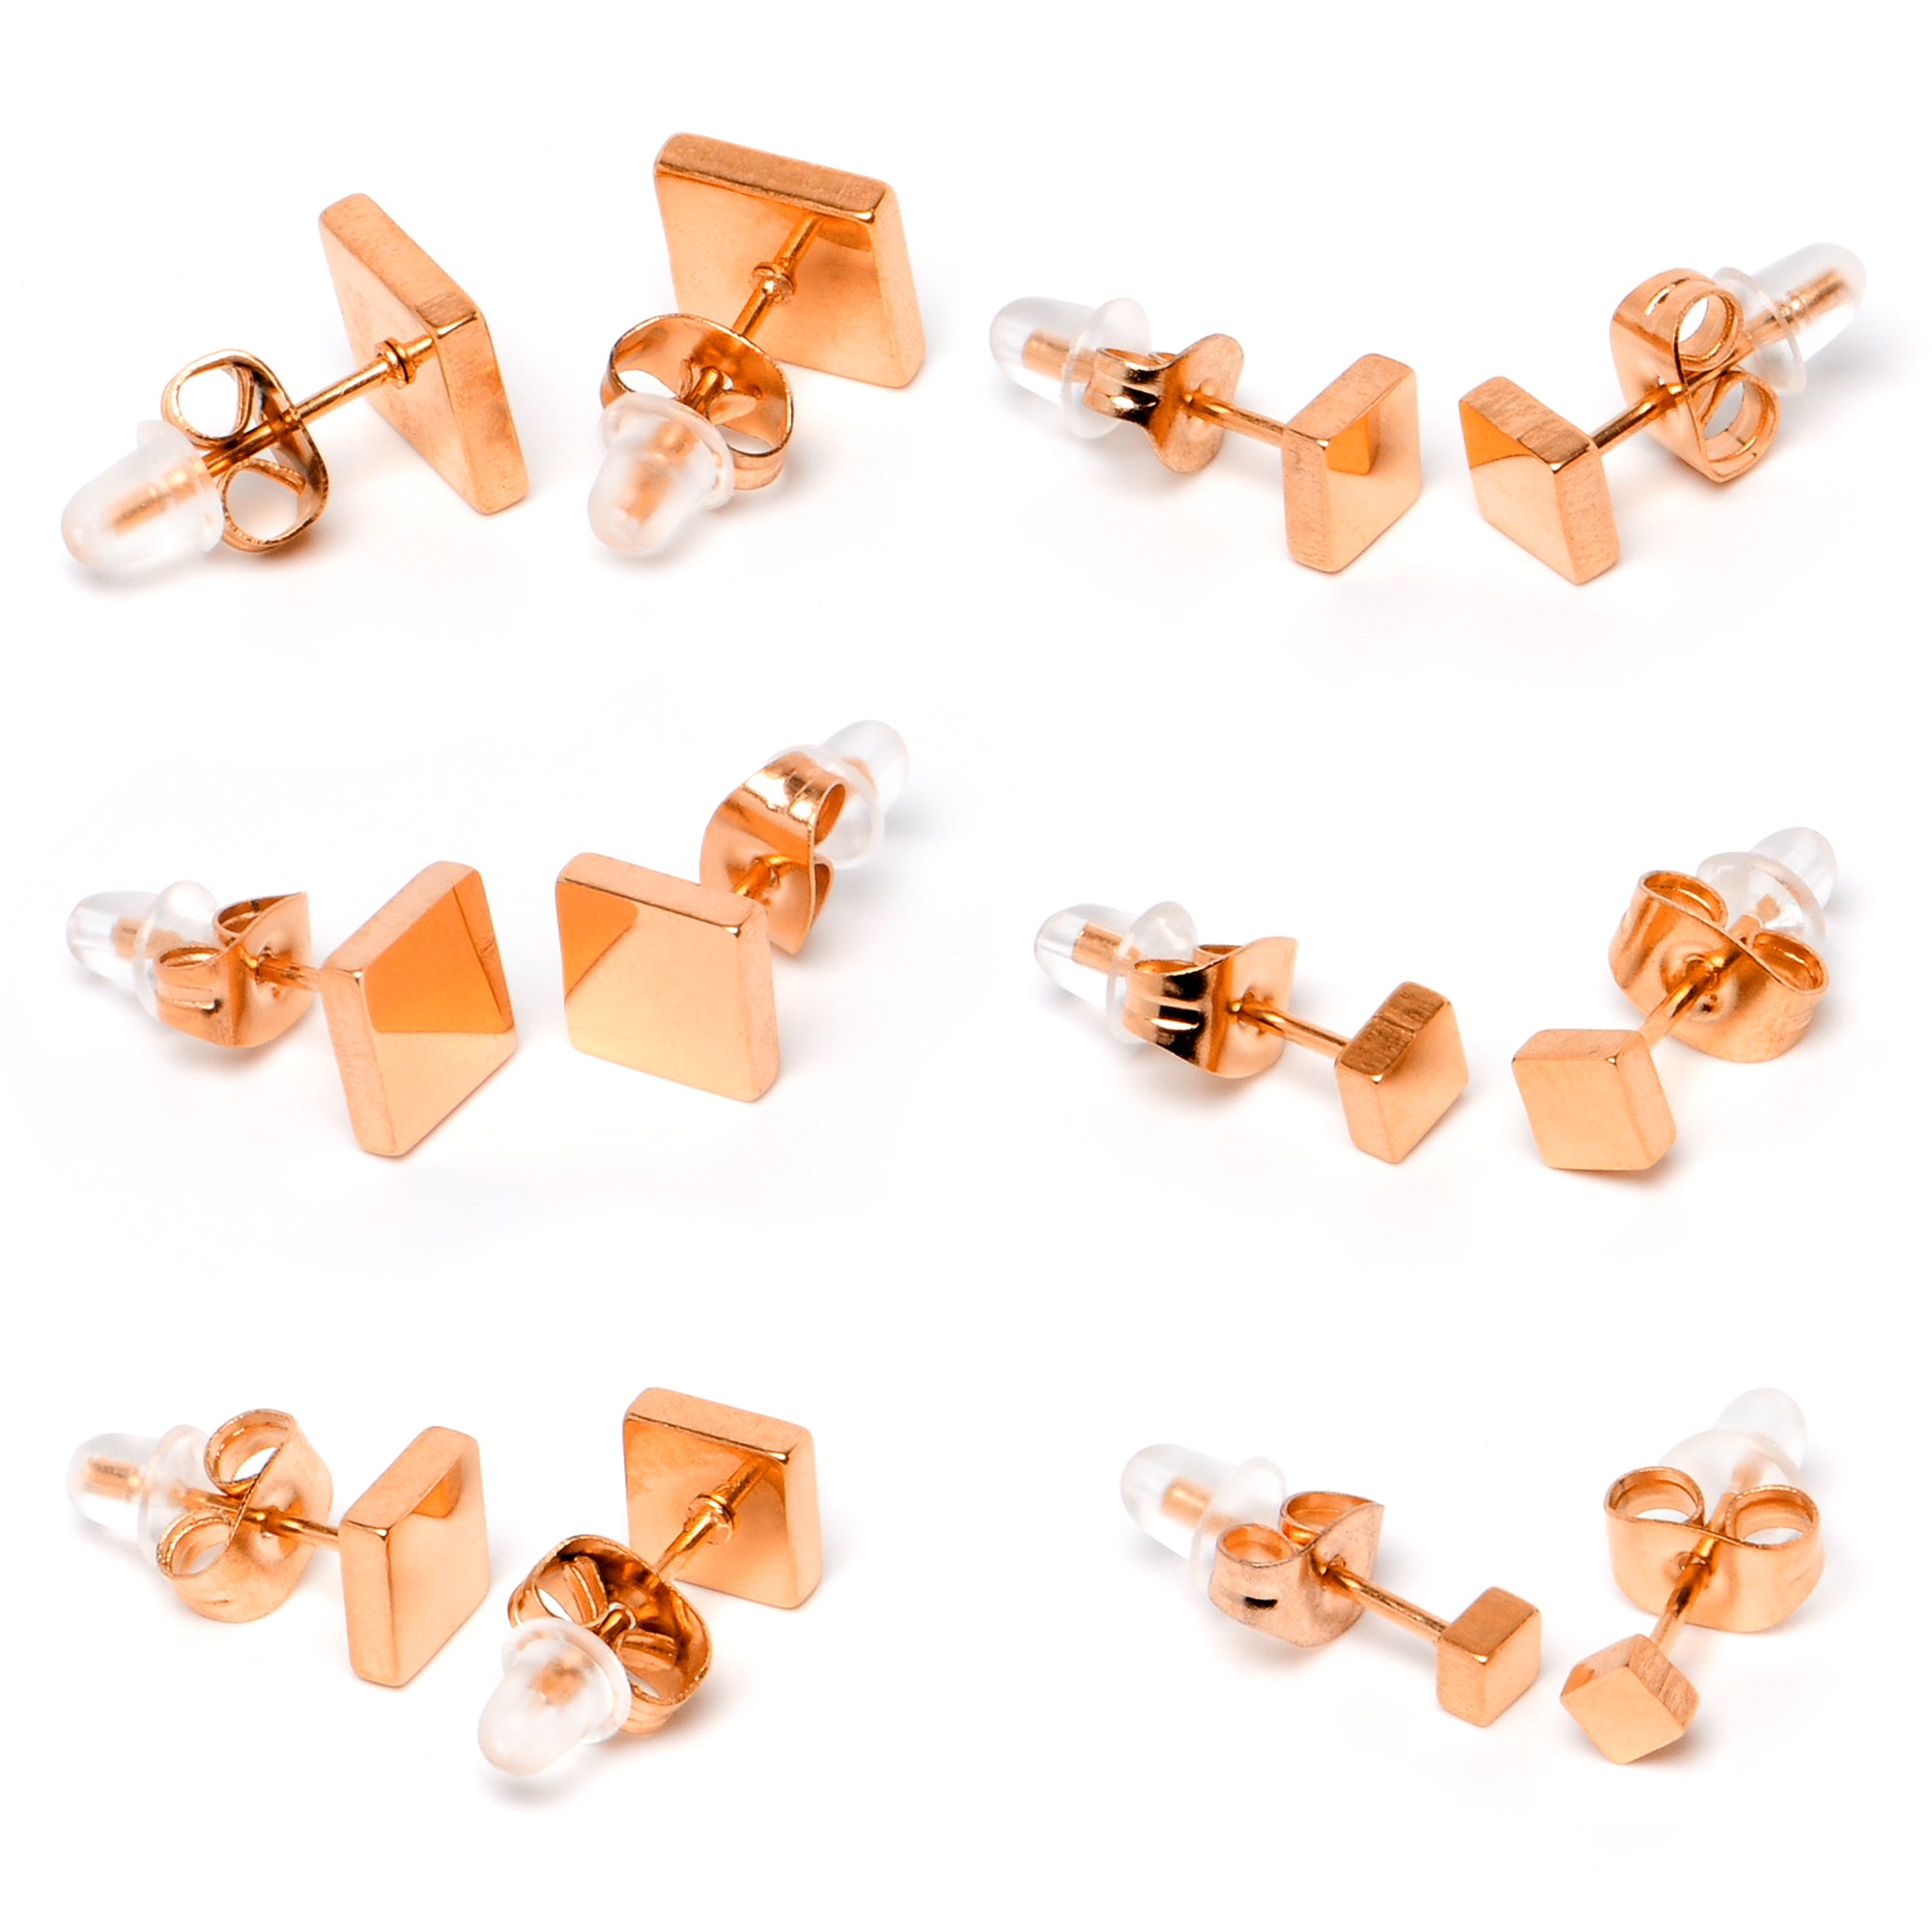 3mm-8mm Square Stud Rose Gold Tone 316L Stainless Steel Earrings 6 Pack